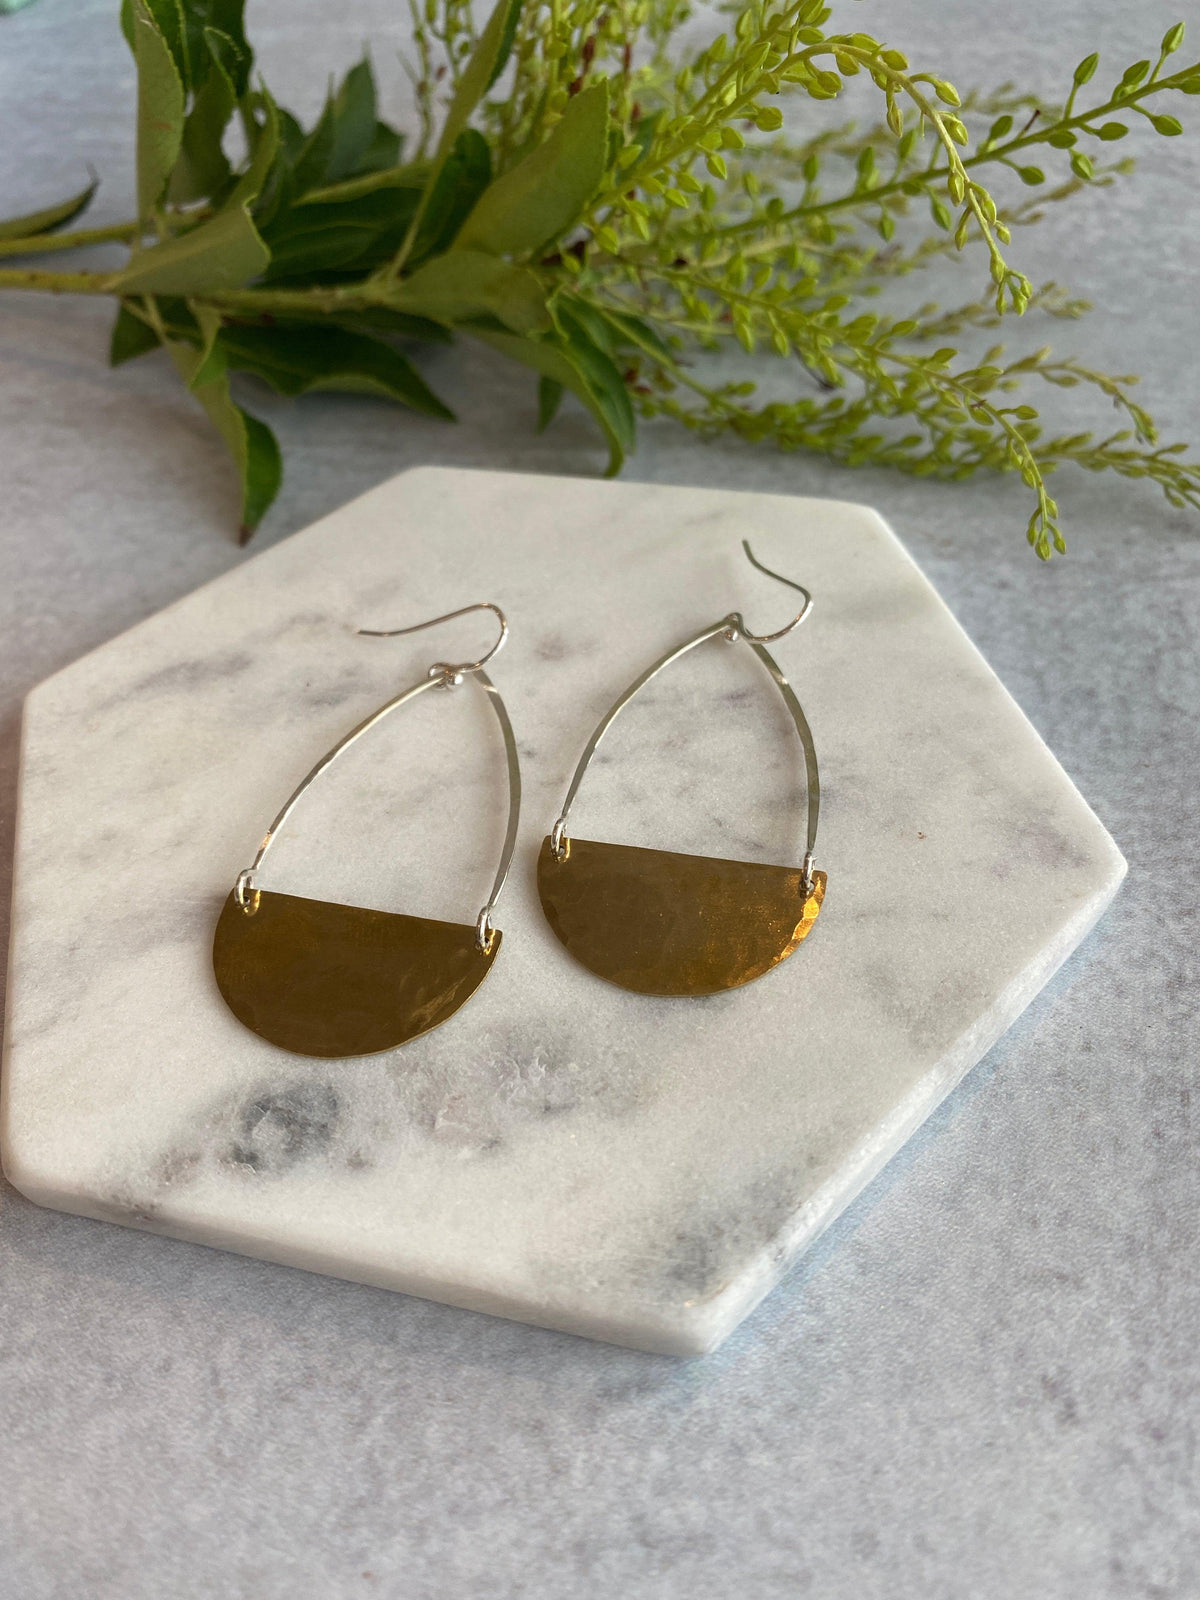 Hammered Gold Moon Earring Hangers (Pair)